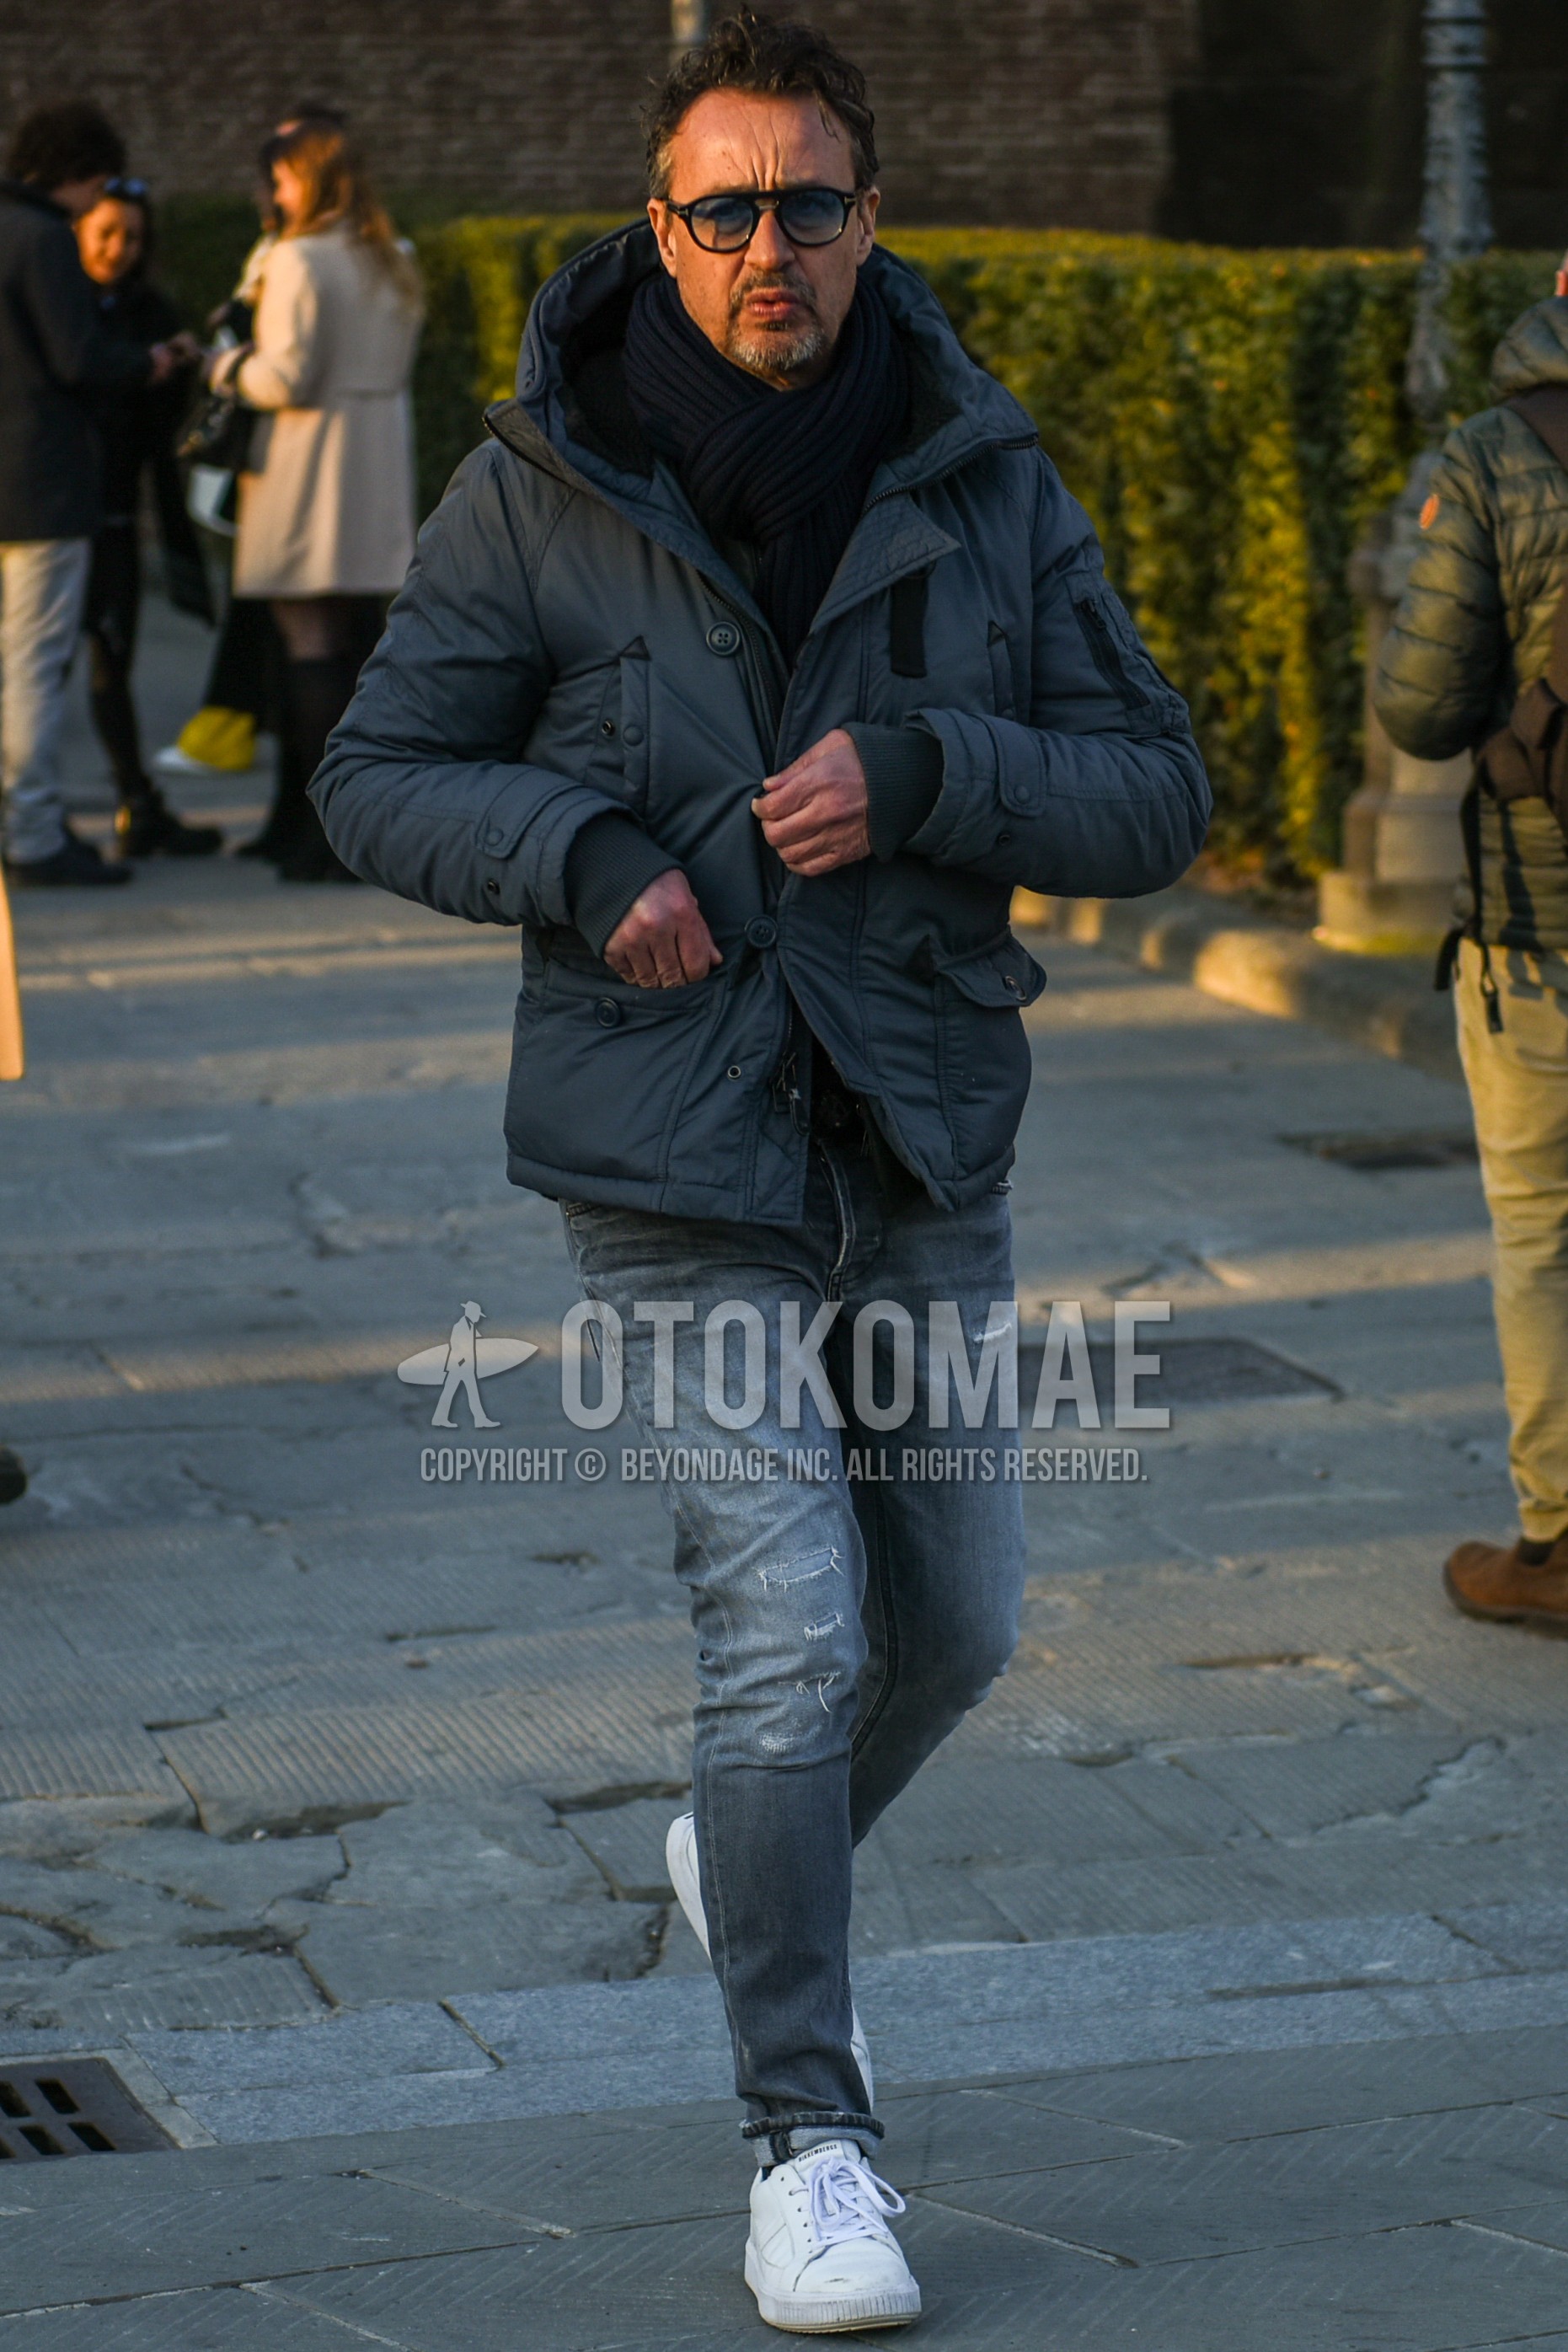 Men's winter outfit with black plain sunglasses, black plain scarf, gray plain down jacket, gray plain damaged jeans, white low-cut sneakers.